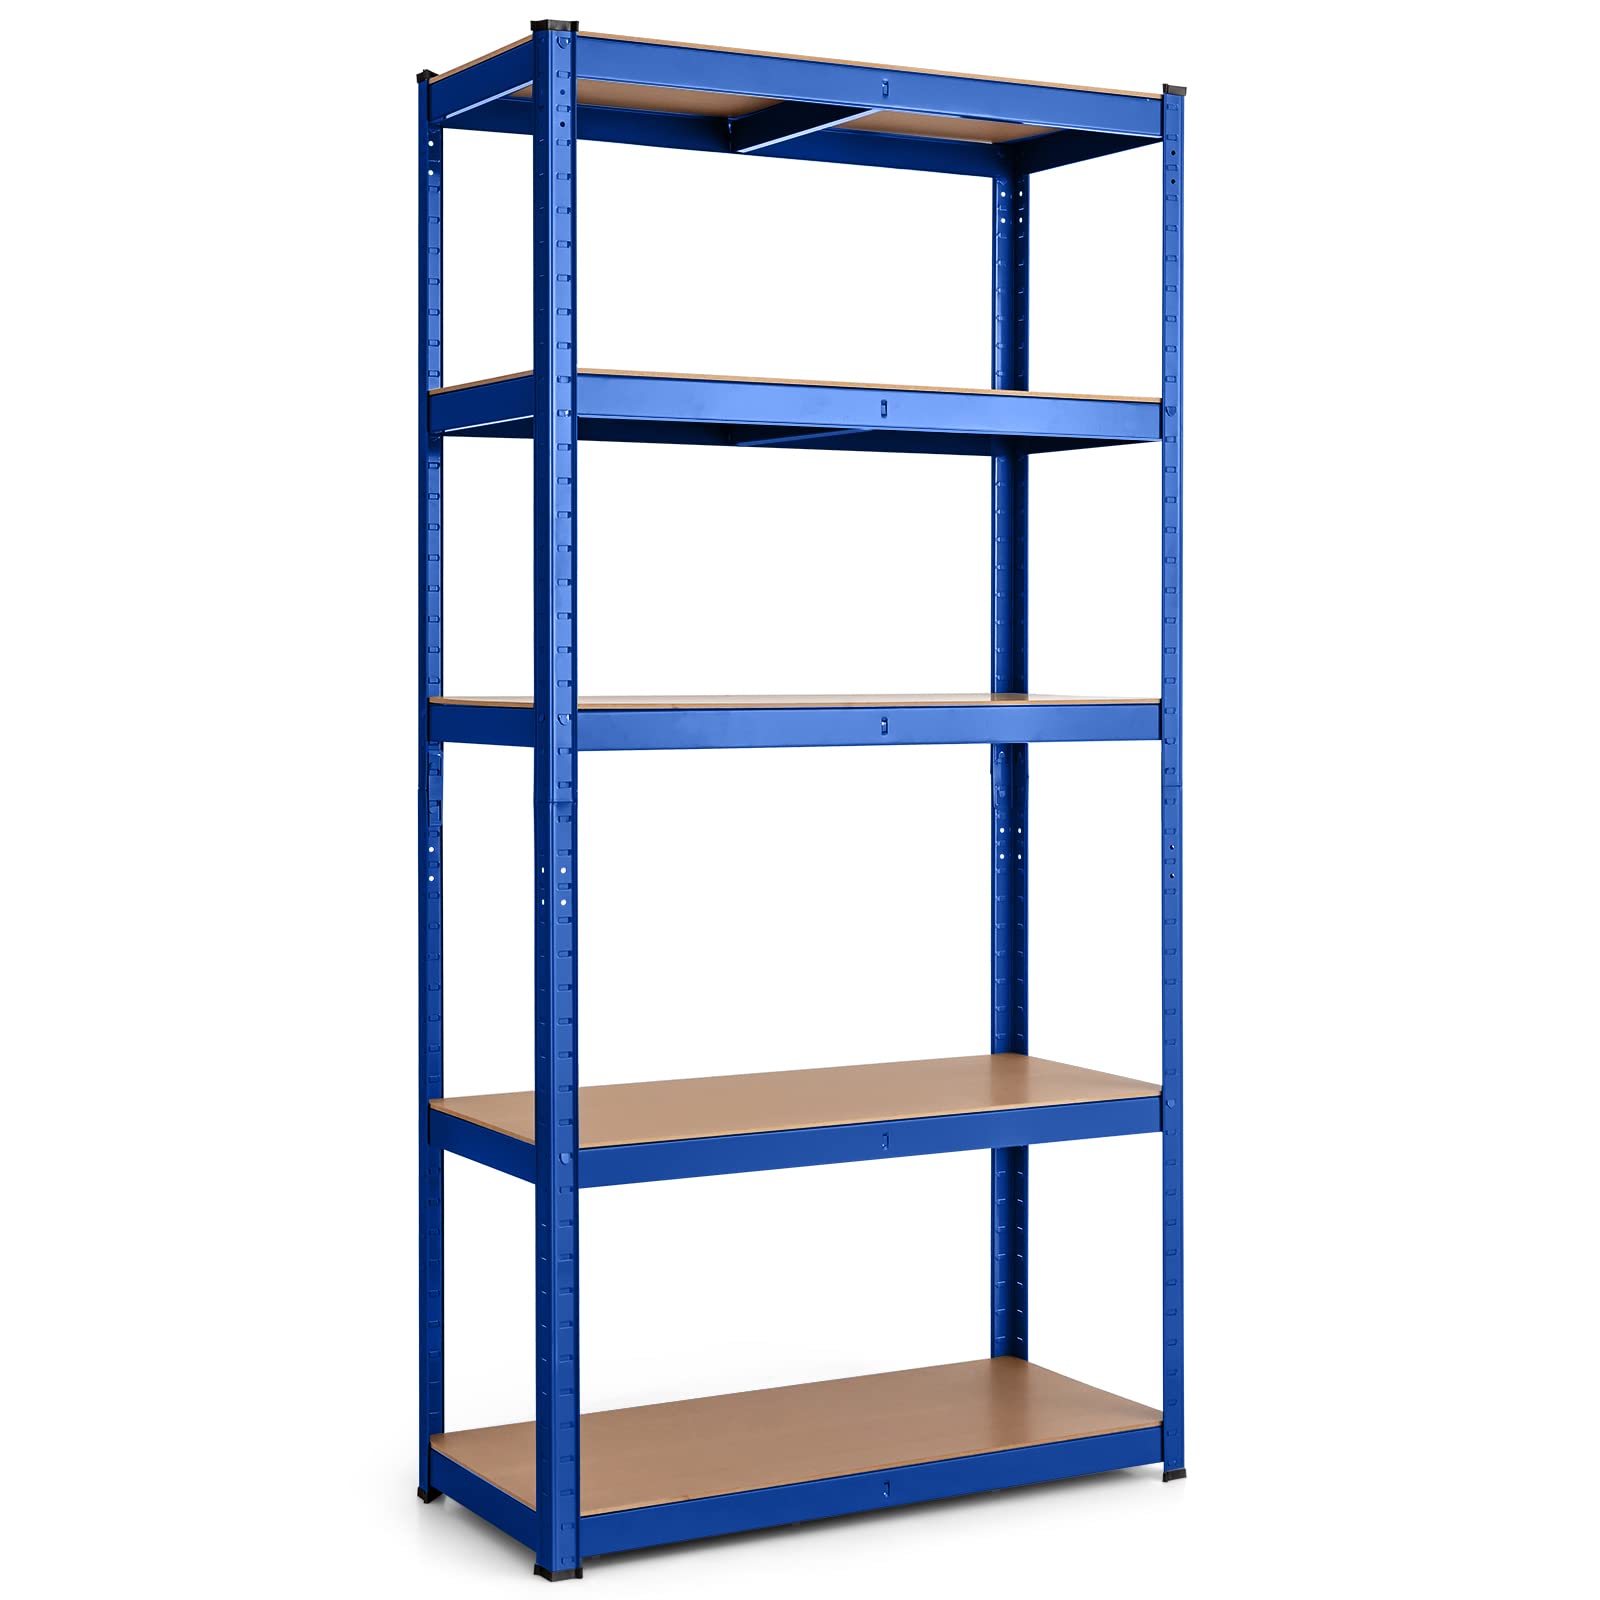 Garage Shelving, 60 Inches 5-Tier Shelving Unit w/ Adjustable Height